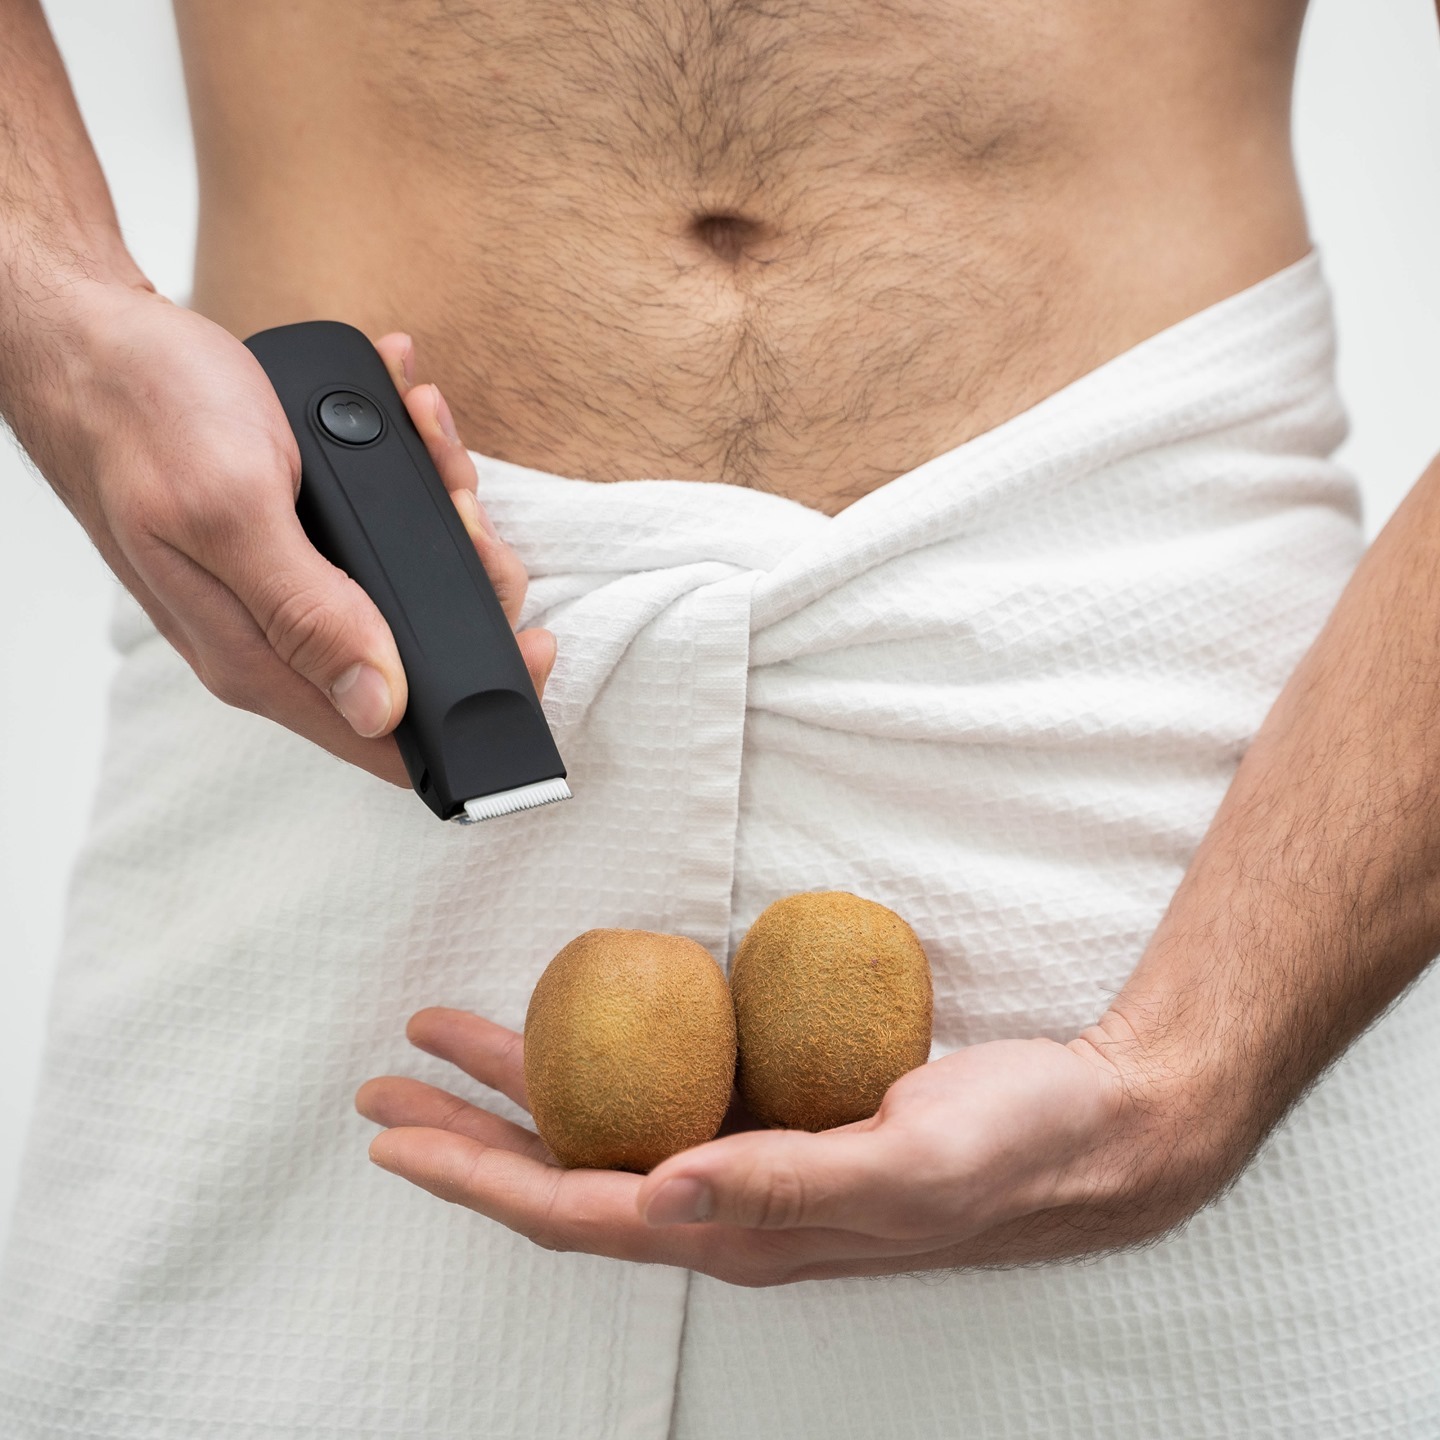 Happy Nuts - Shave Your Kiwis